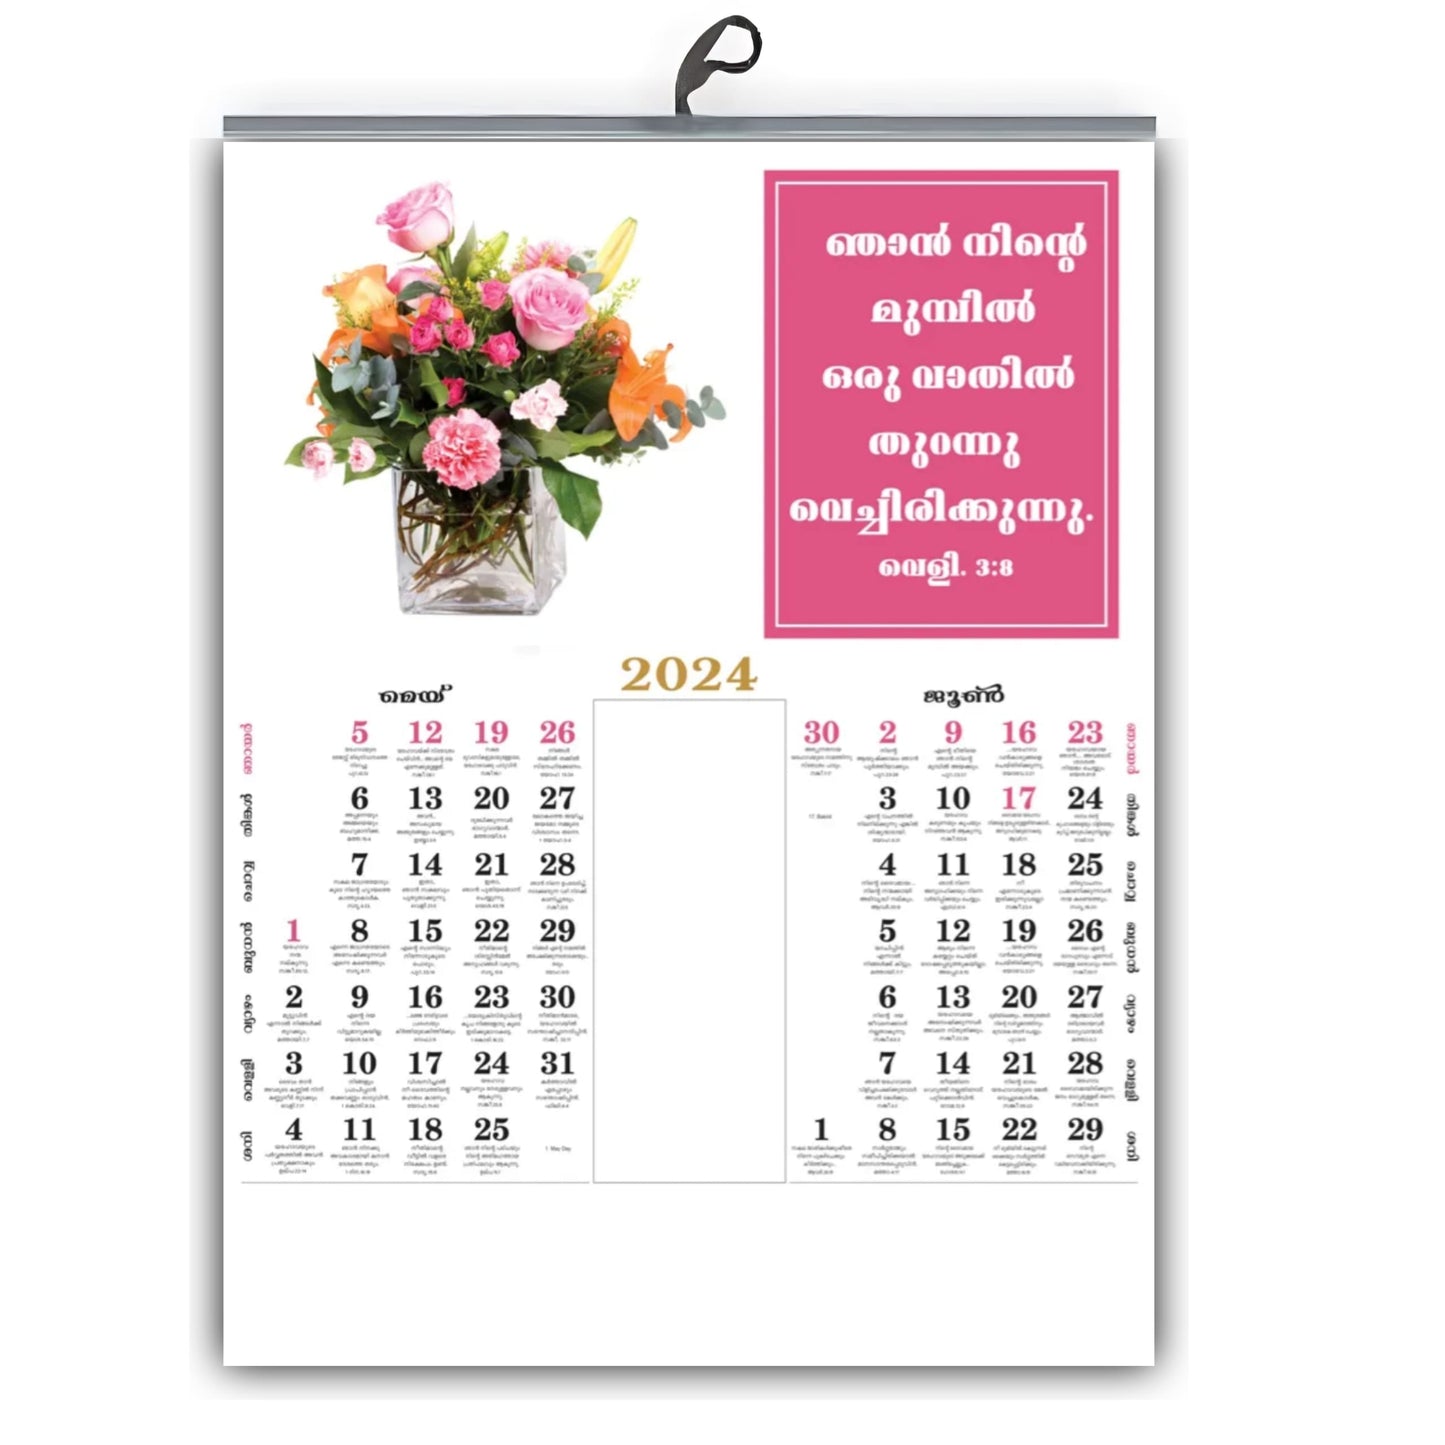 2024 Malayalam Bible Verse Colourful Flower With Bible Words Wall Calendar